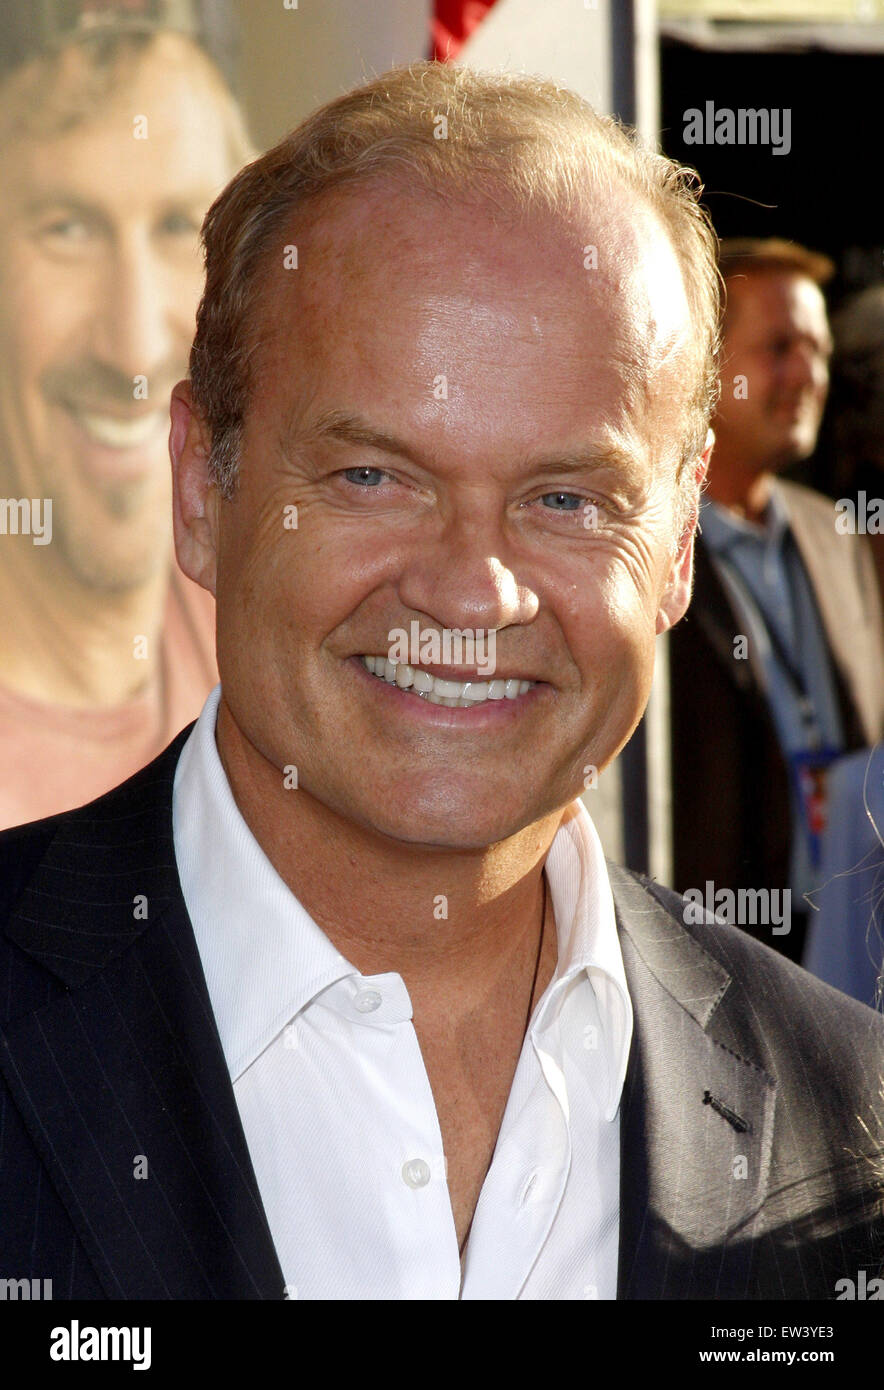 Kelsey Grammer at the Los Angeles premiere of 'Swing Vote' held at the El Capitan Theater in Hollywood on July 24, 2008. Stock Photo